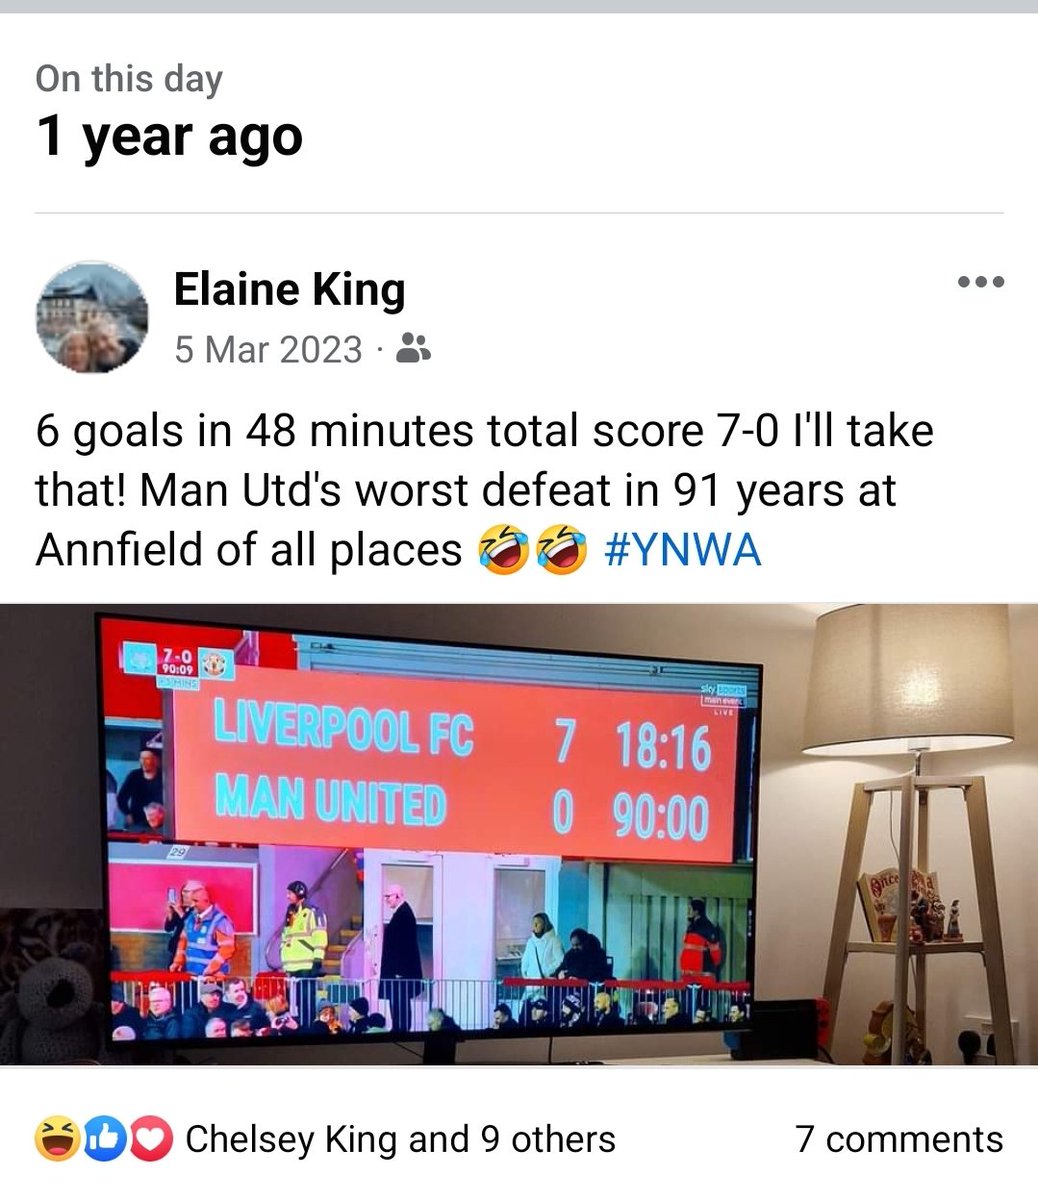 Meanwhile over on Faceache what a beautiful memory 🤣🤣 6 goals in 48 minutes 🙌🏻🙌🏻🙌🏻 #LiverpoolFC #SevenNil #Anfield #LFC